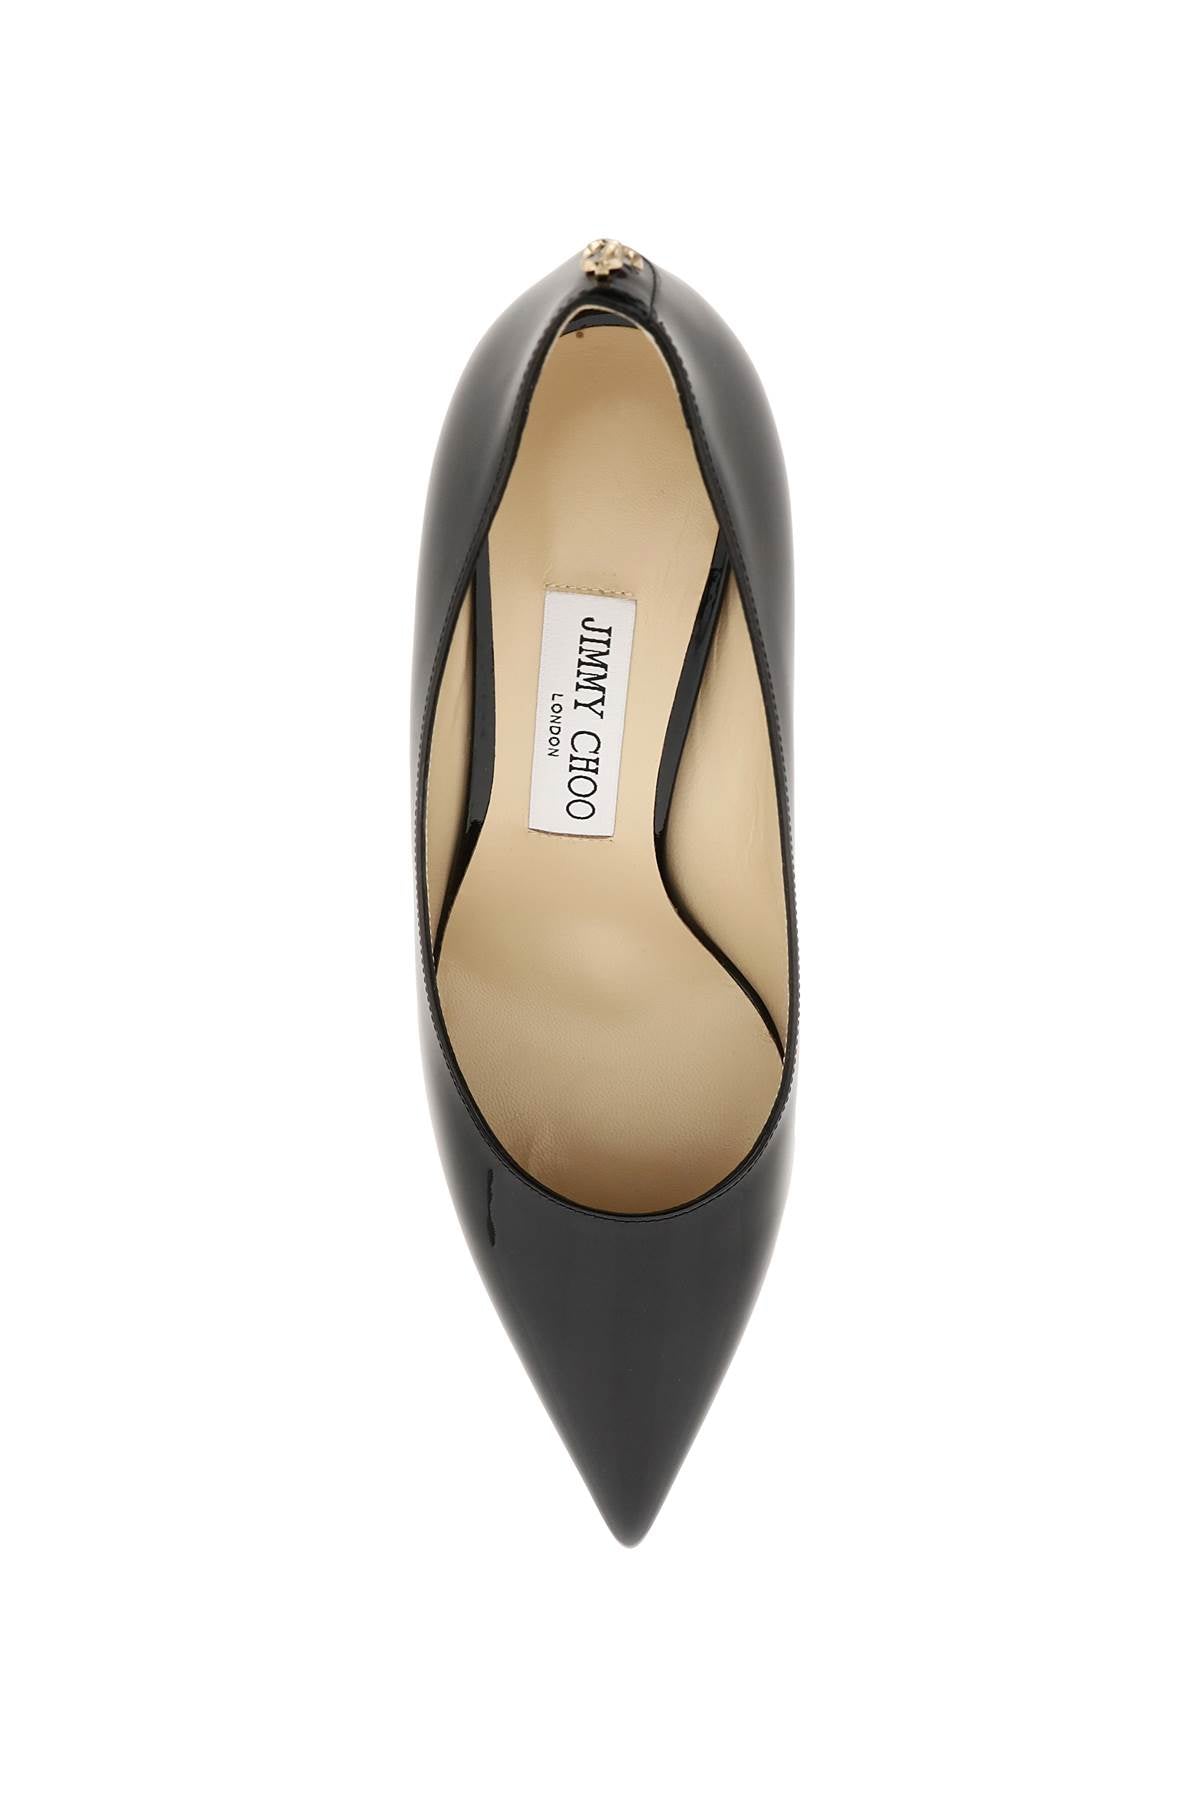 Stylish and Chic Love Pumps in Classic Black for Women